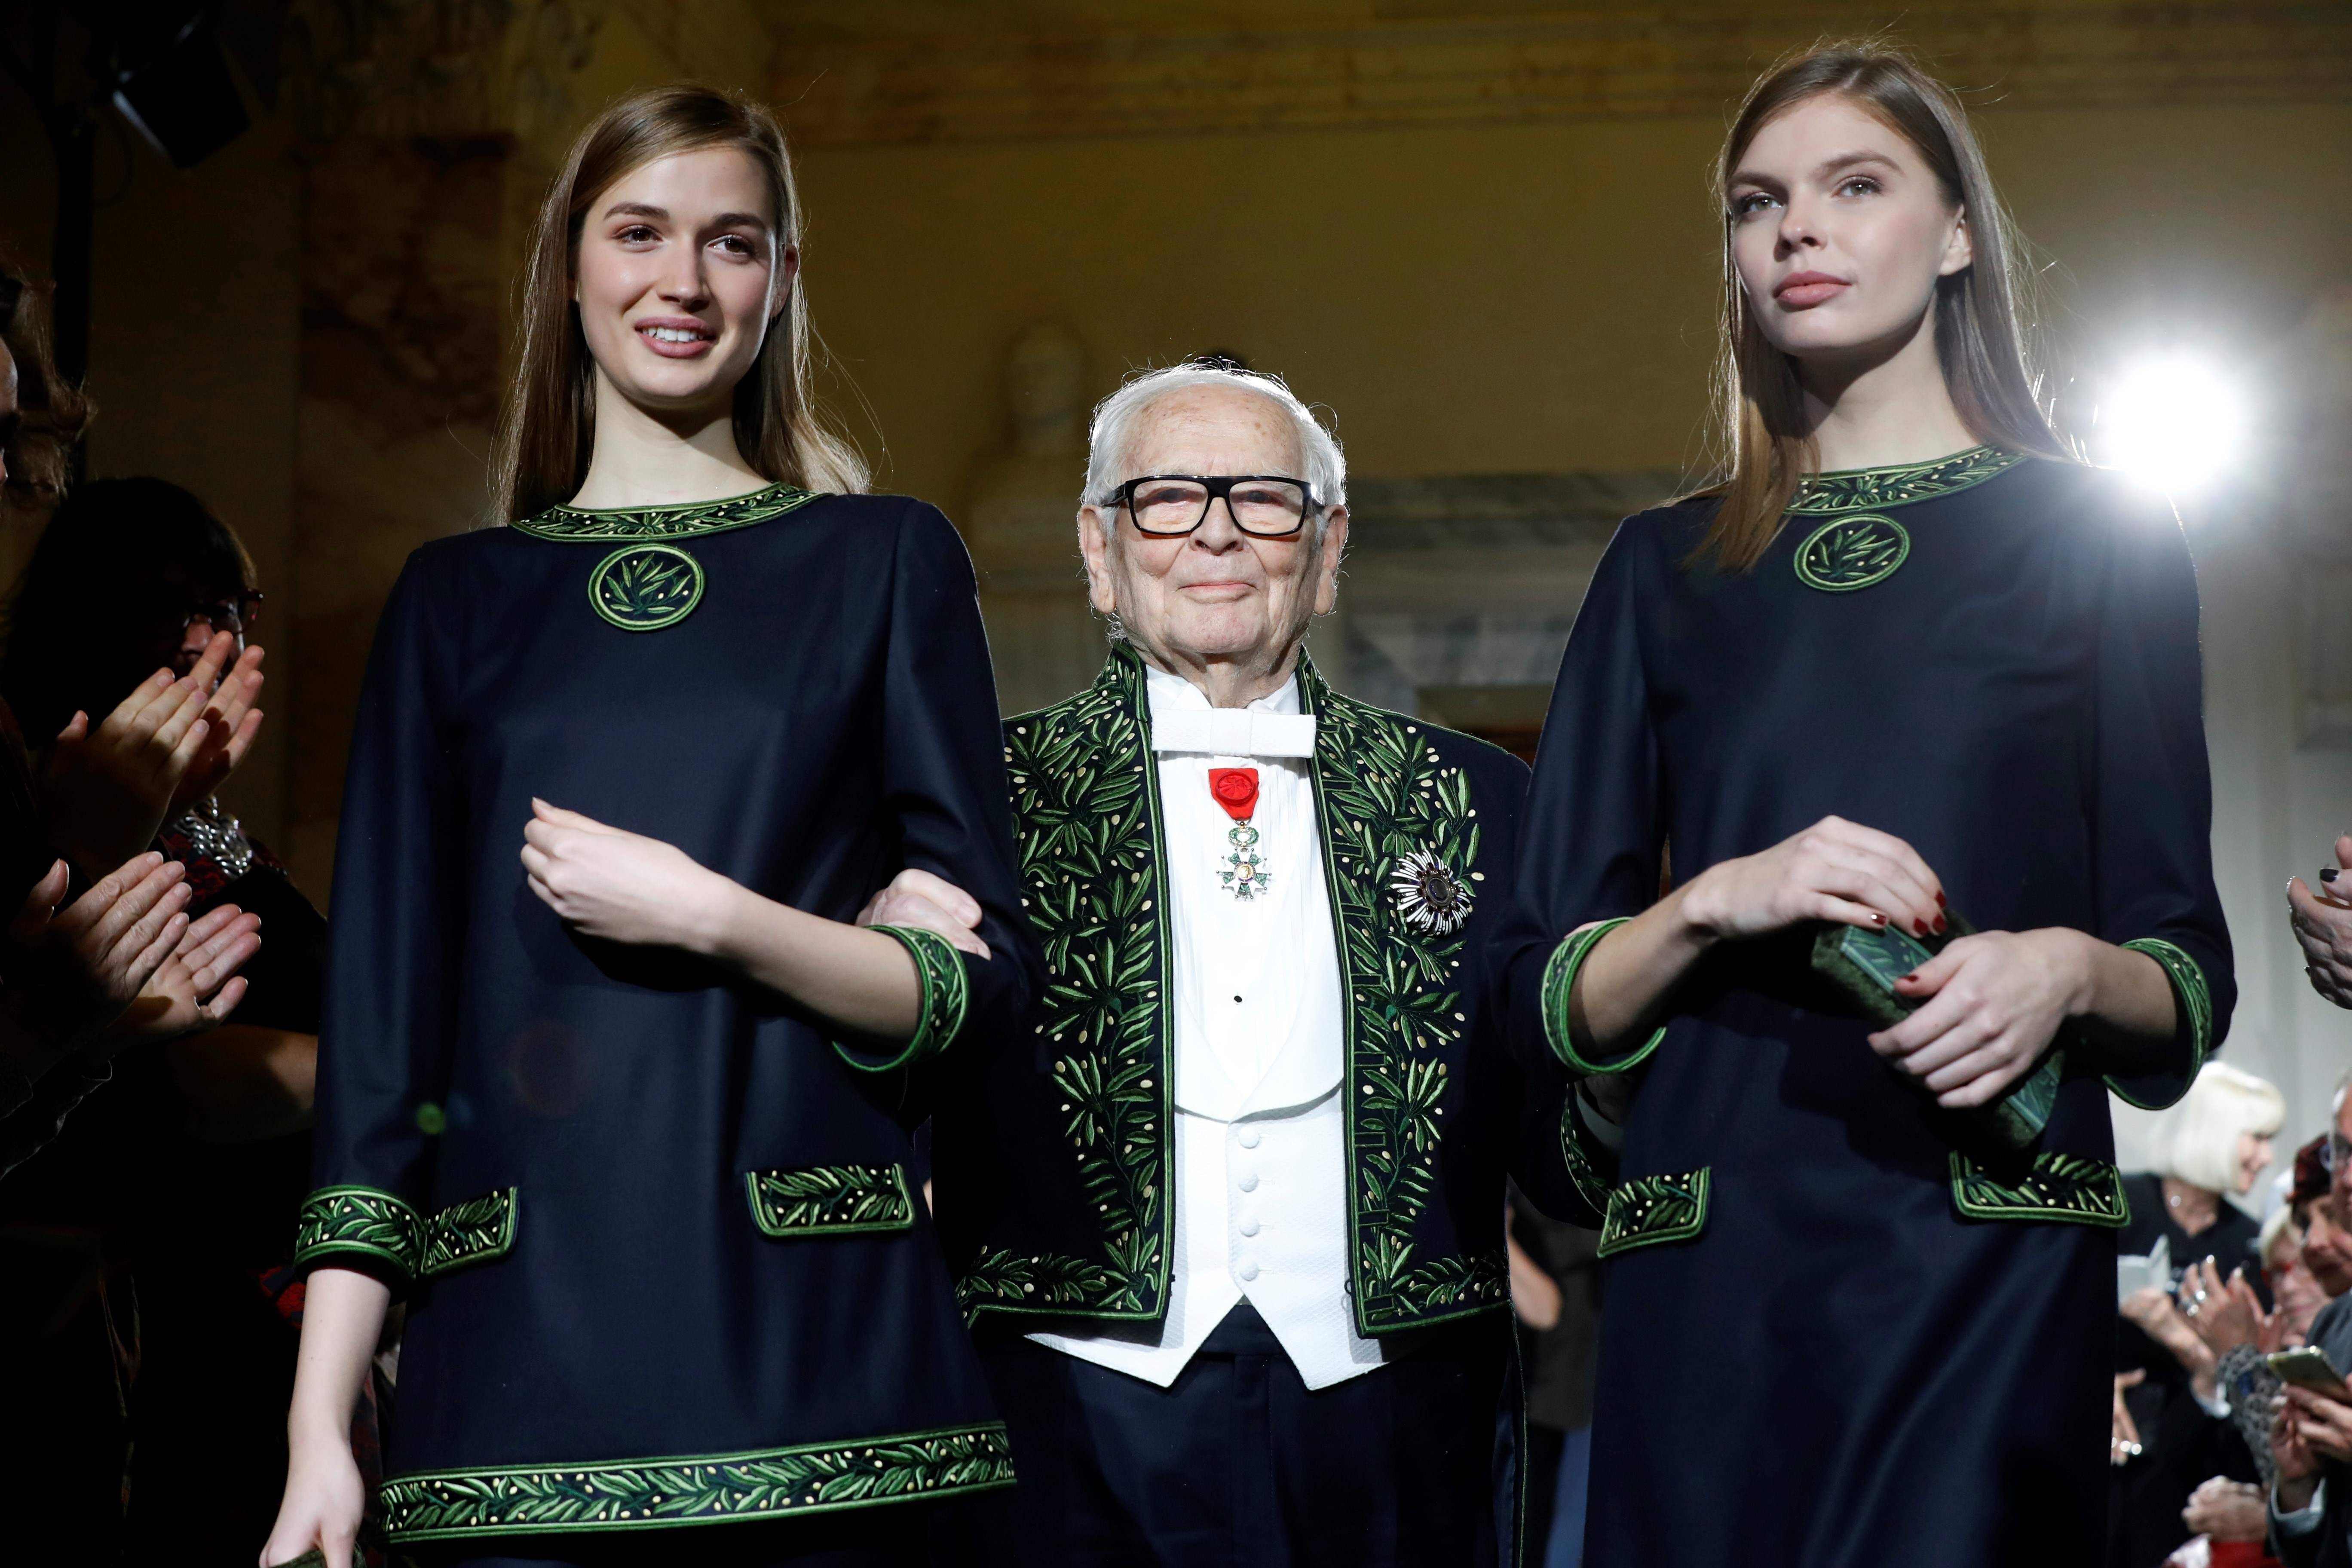 Pierre Cardin, the Groundbreaking French Fashion Designer, Has Died at 98